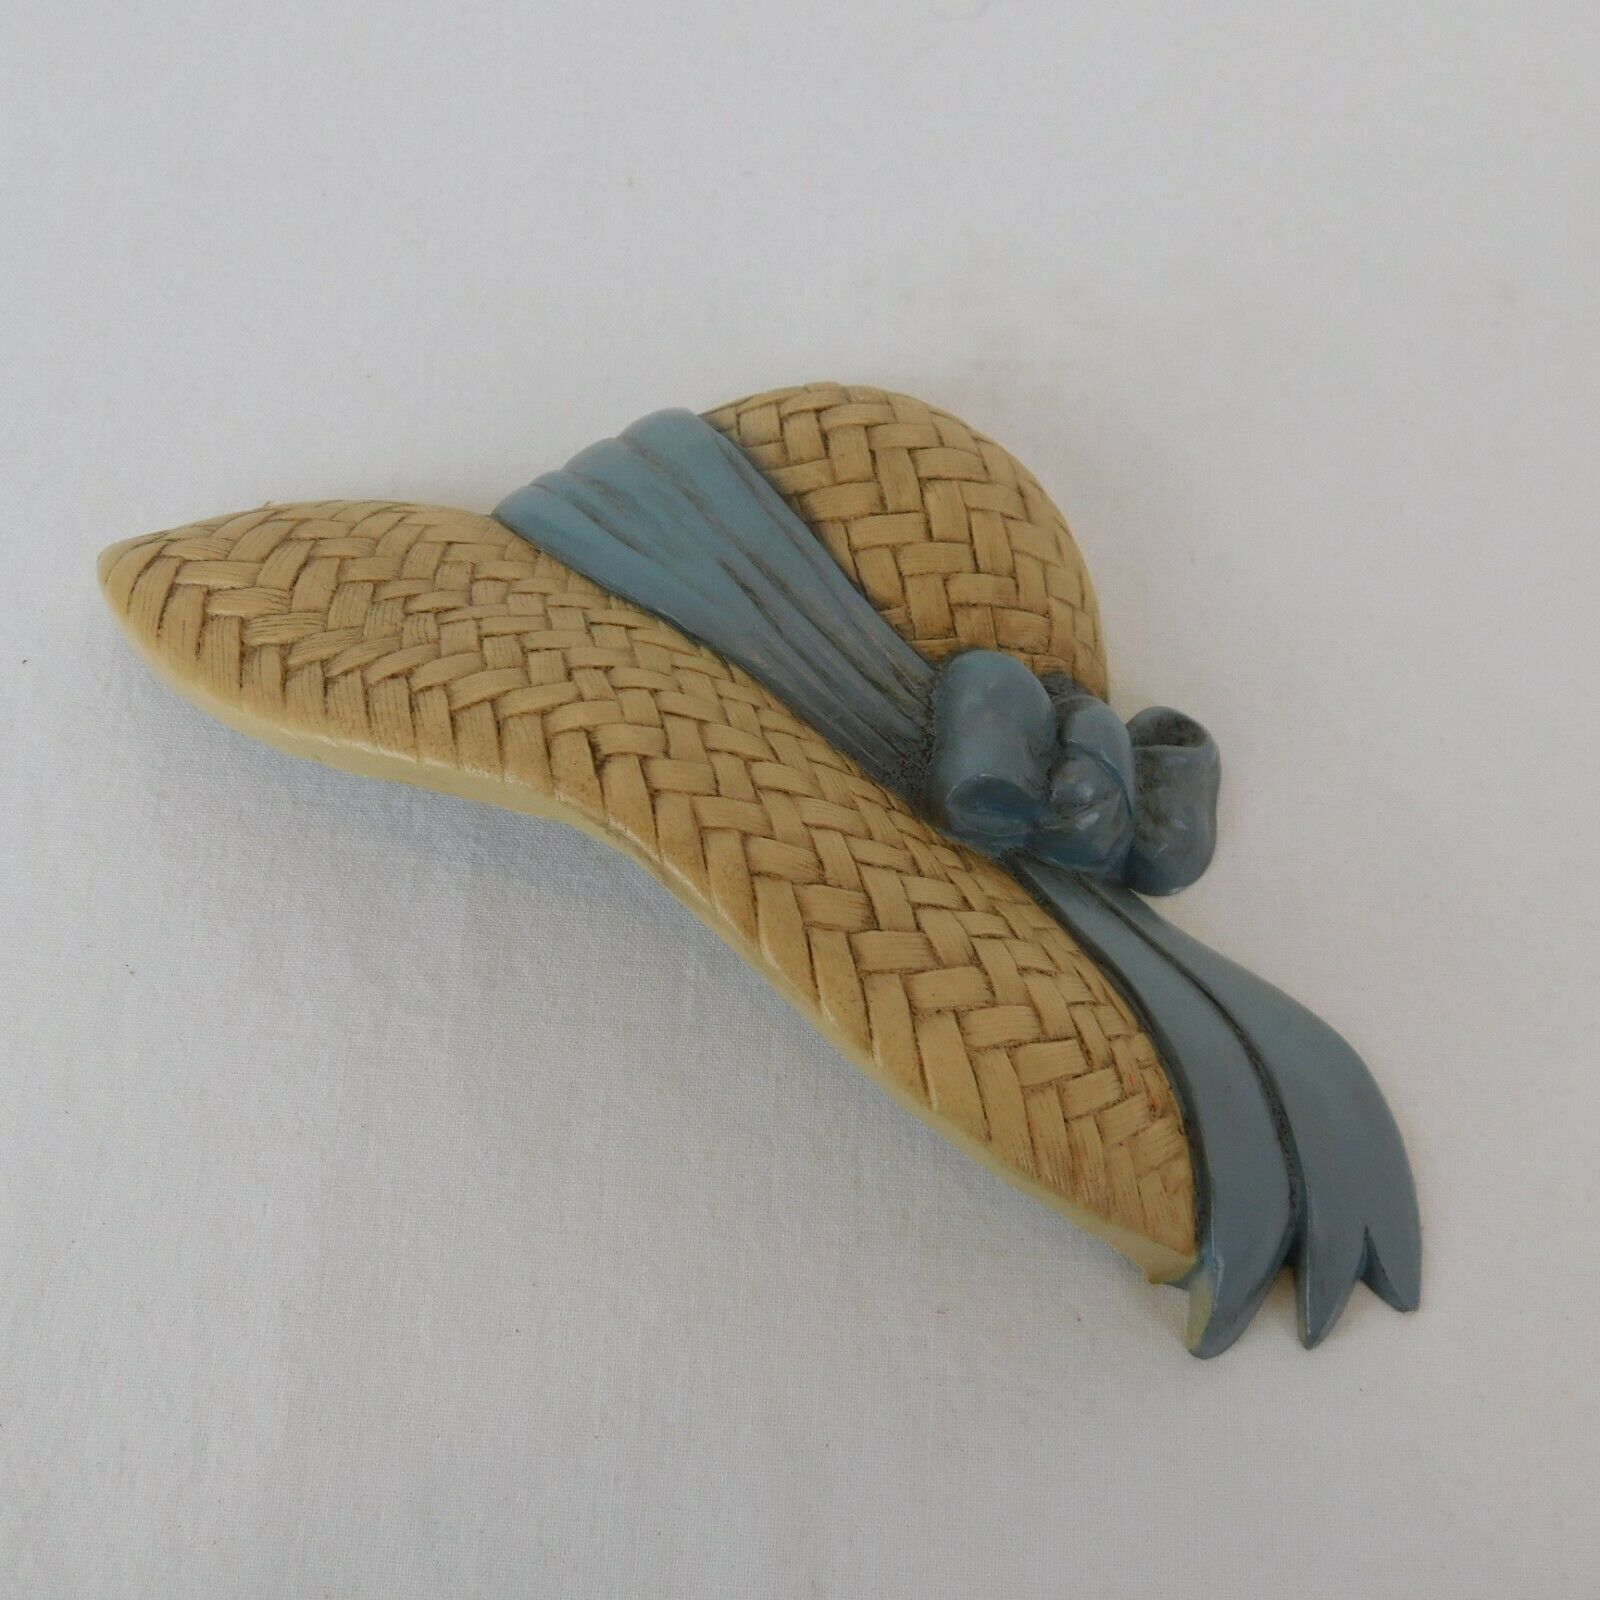 Plastic Straw Hat With Blue Ribbon Wall Hanging Decoration By Burwood Vintage - $5.95